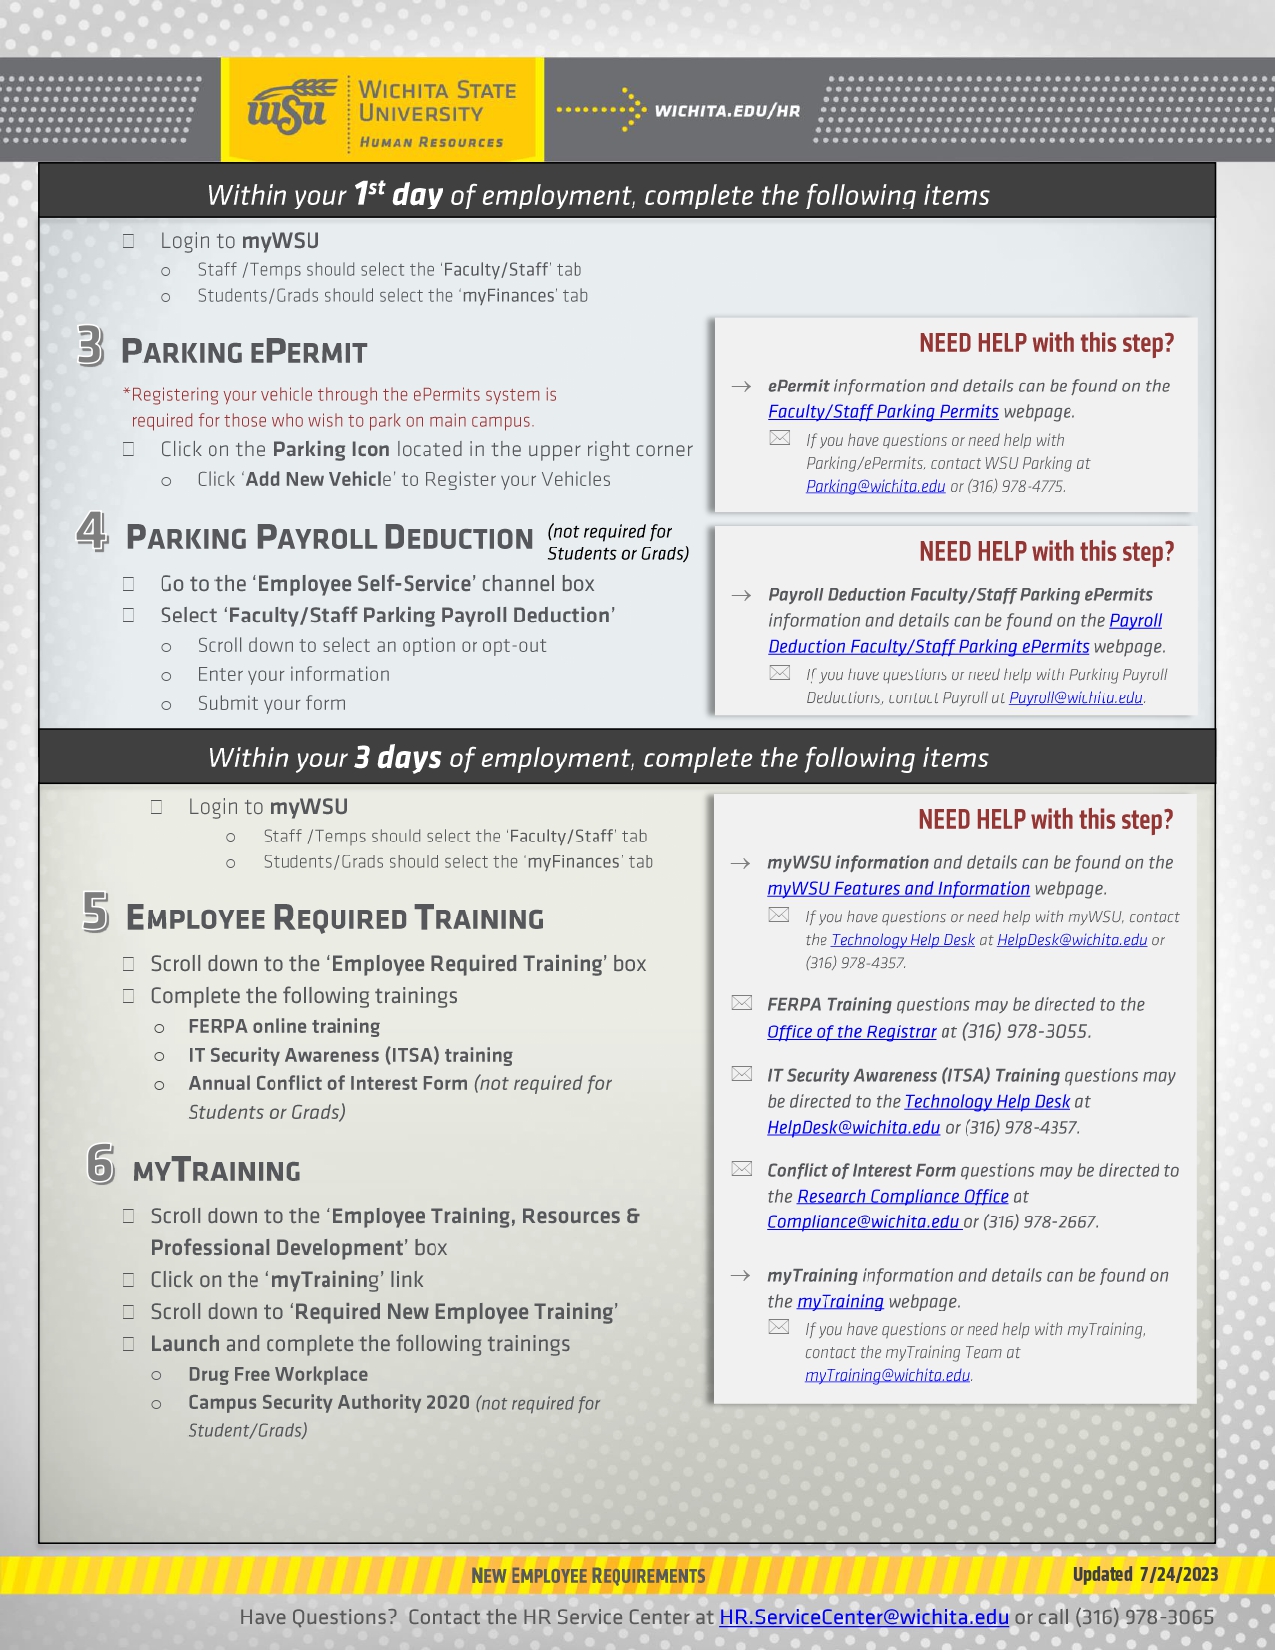 New Employee Requirements Checklist pg2